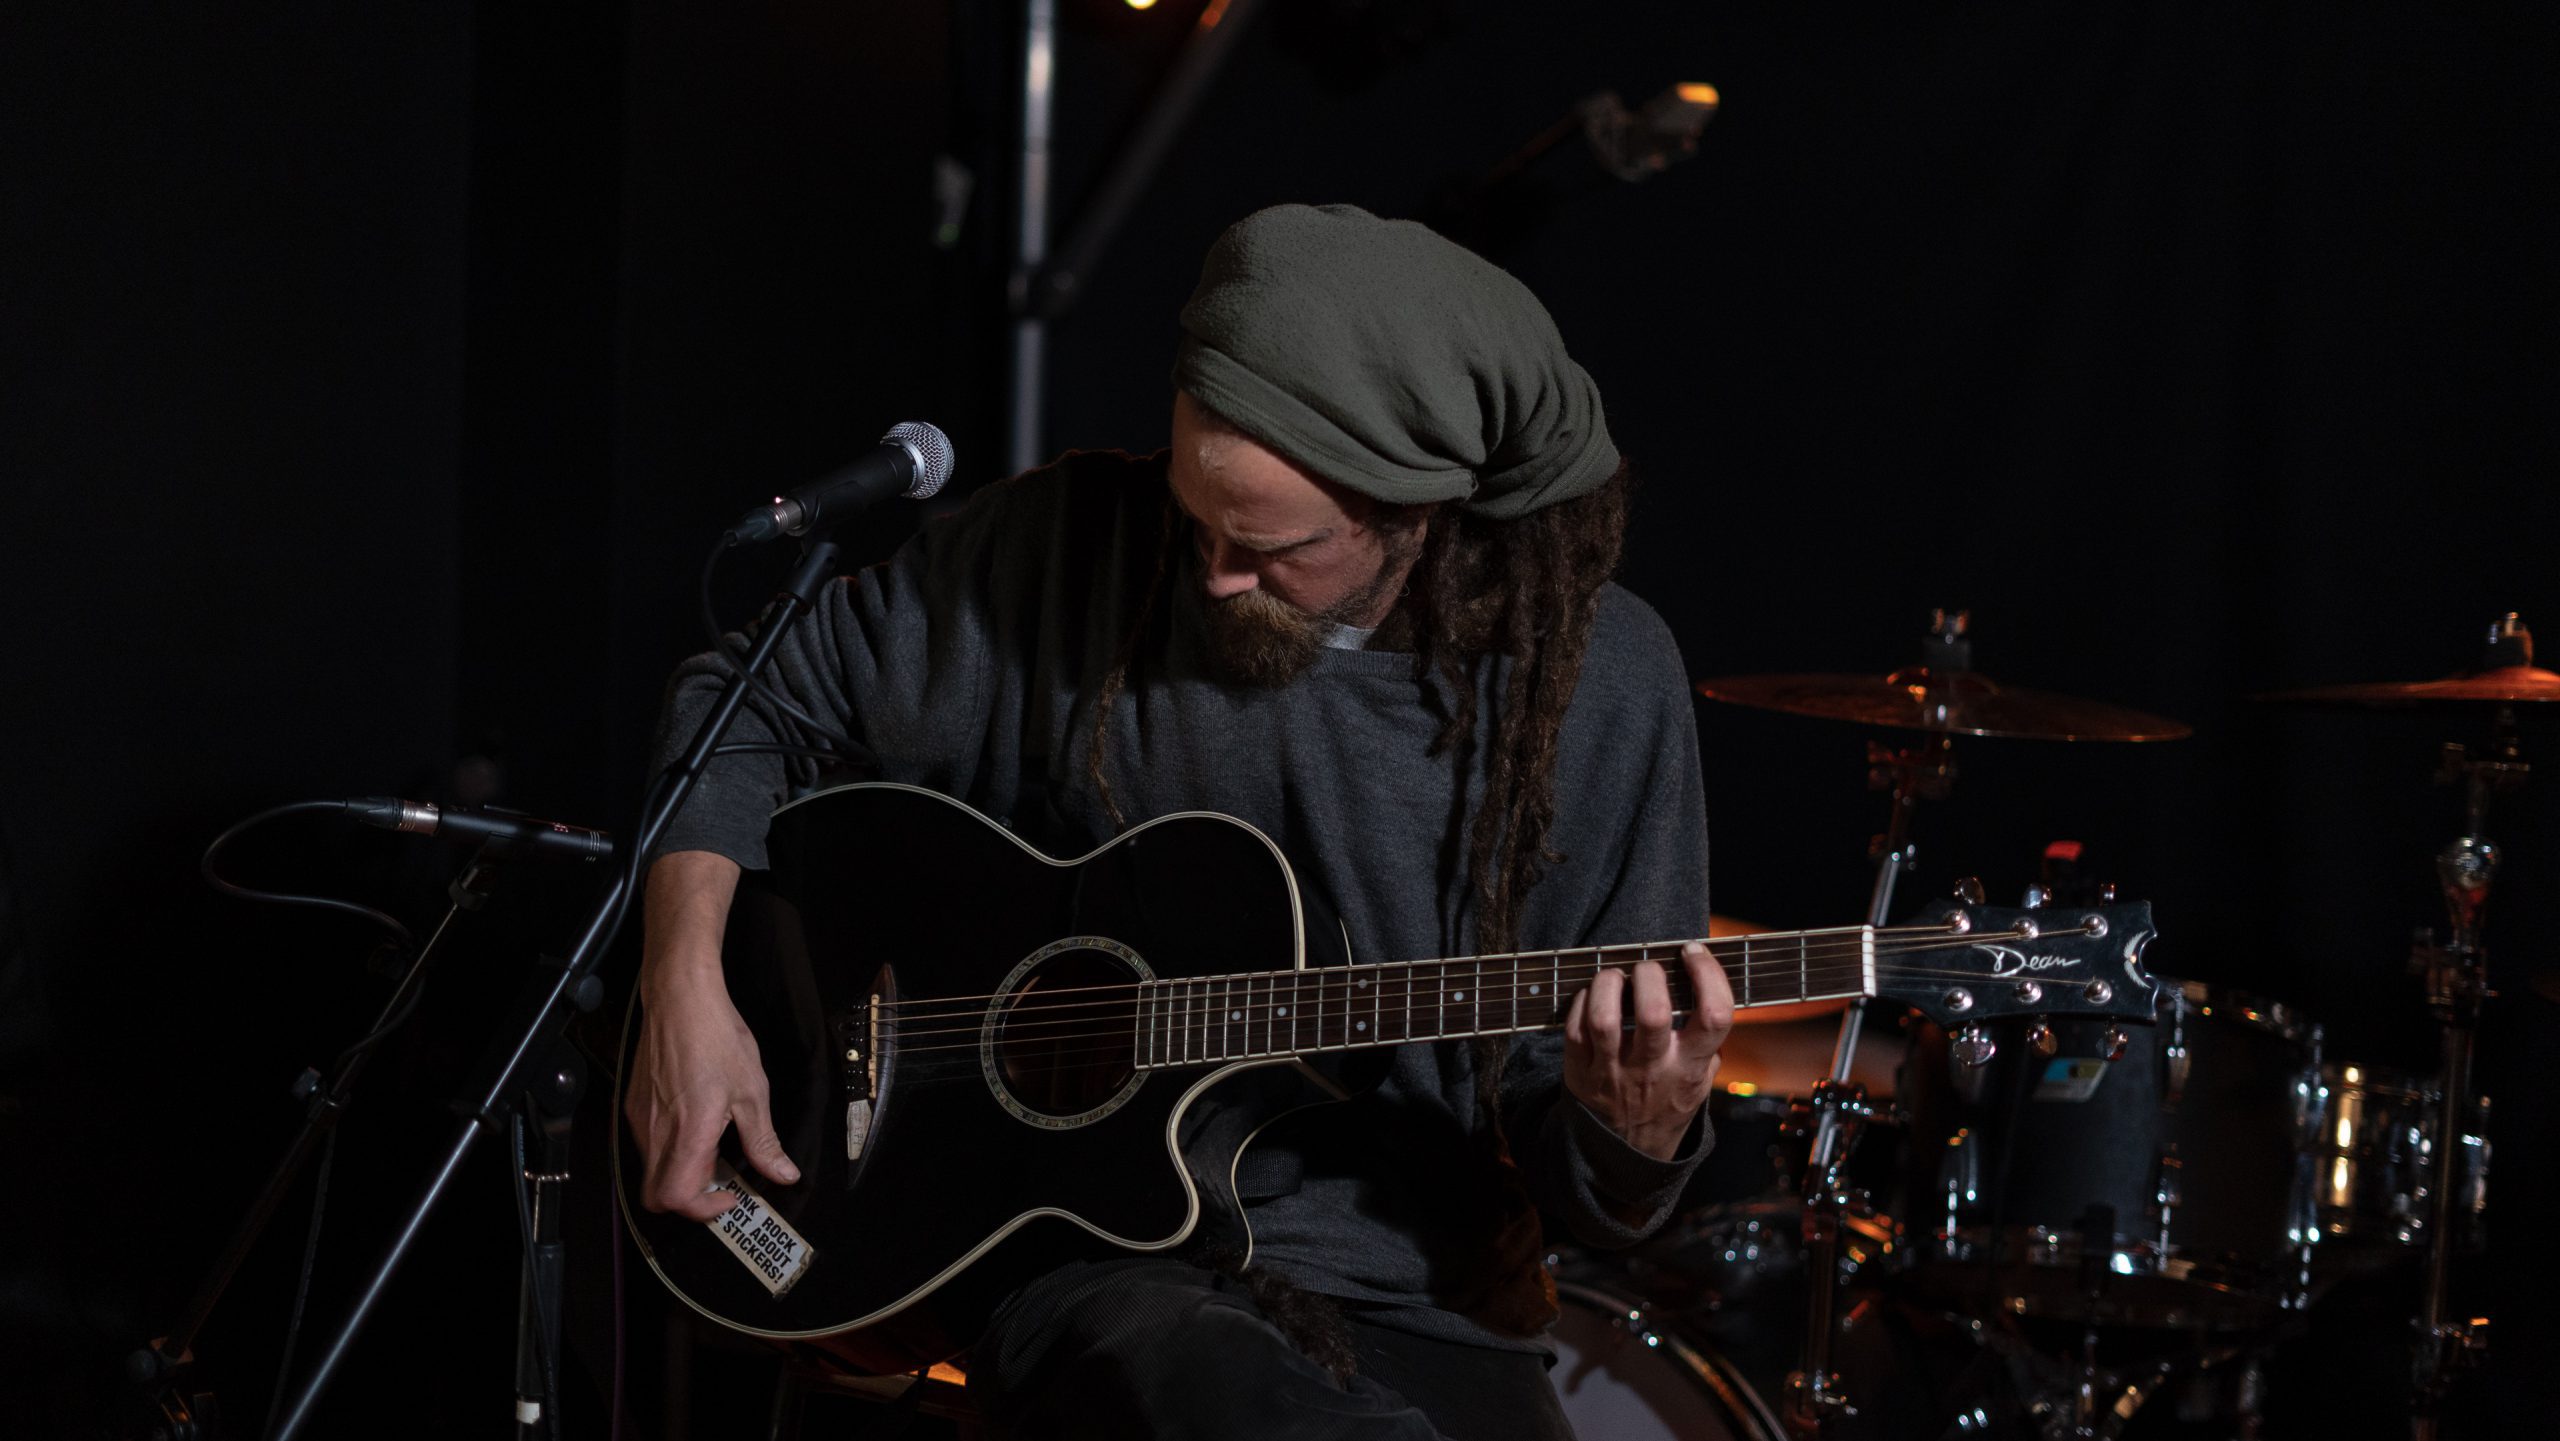 Man with dreadlocks and a head scarf playing guitar on darkened stage